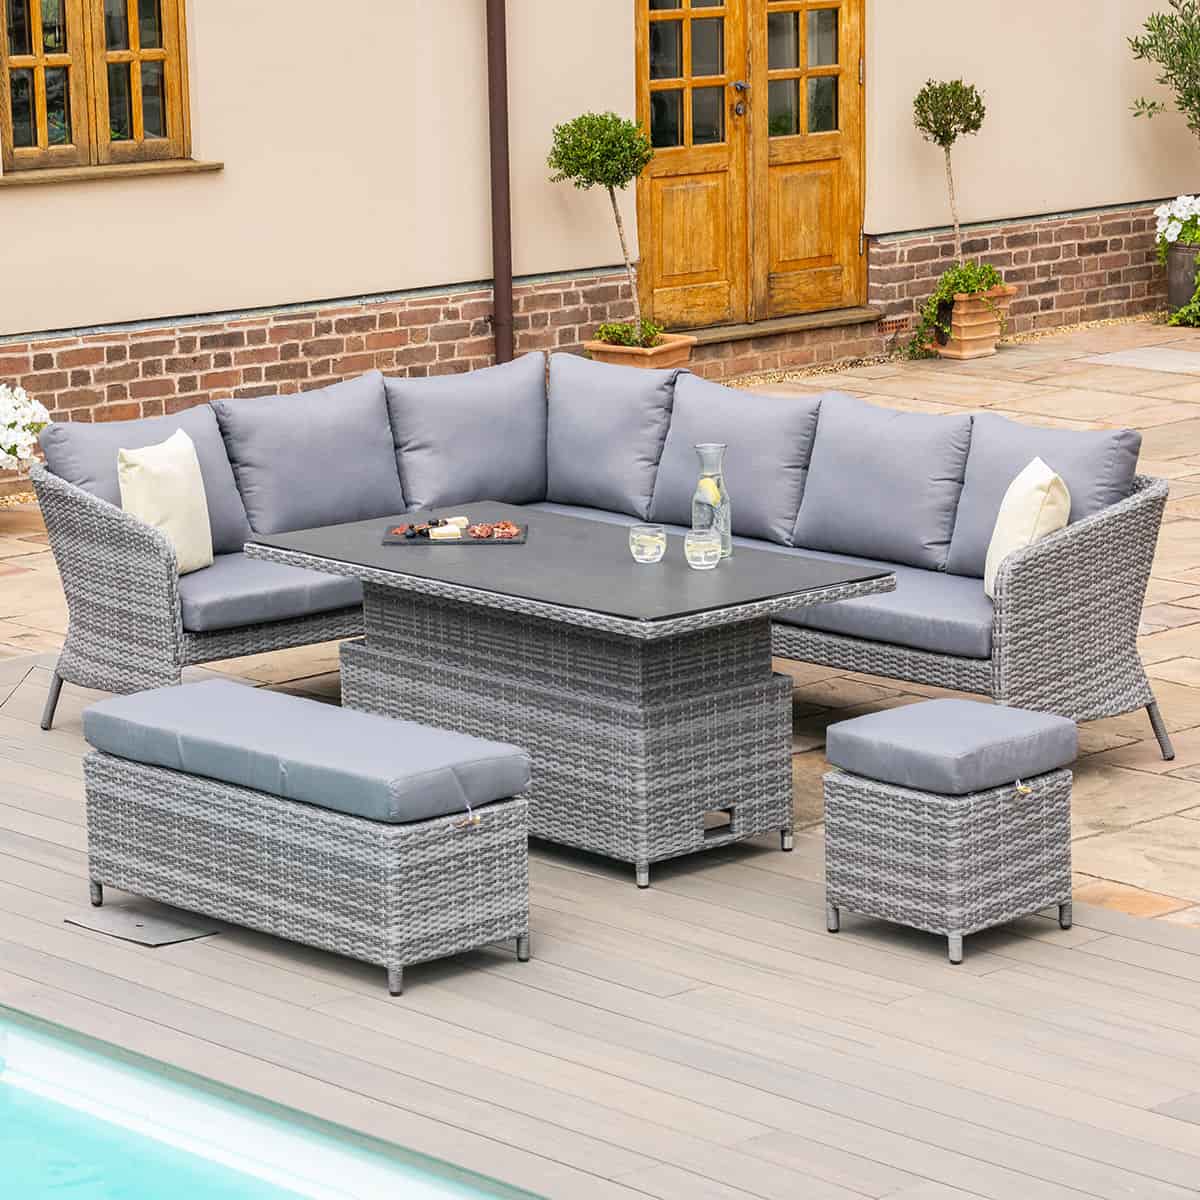 Grey rattan casual corner dining set with rectangular rising table, bench and a stool